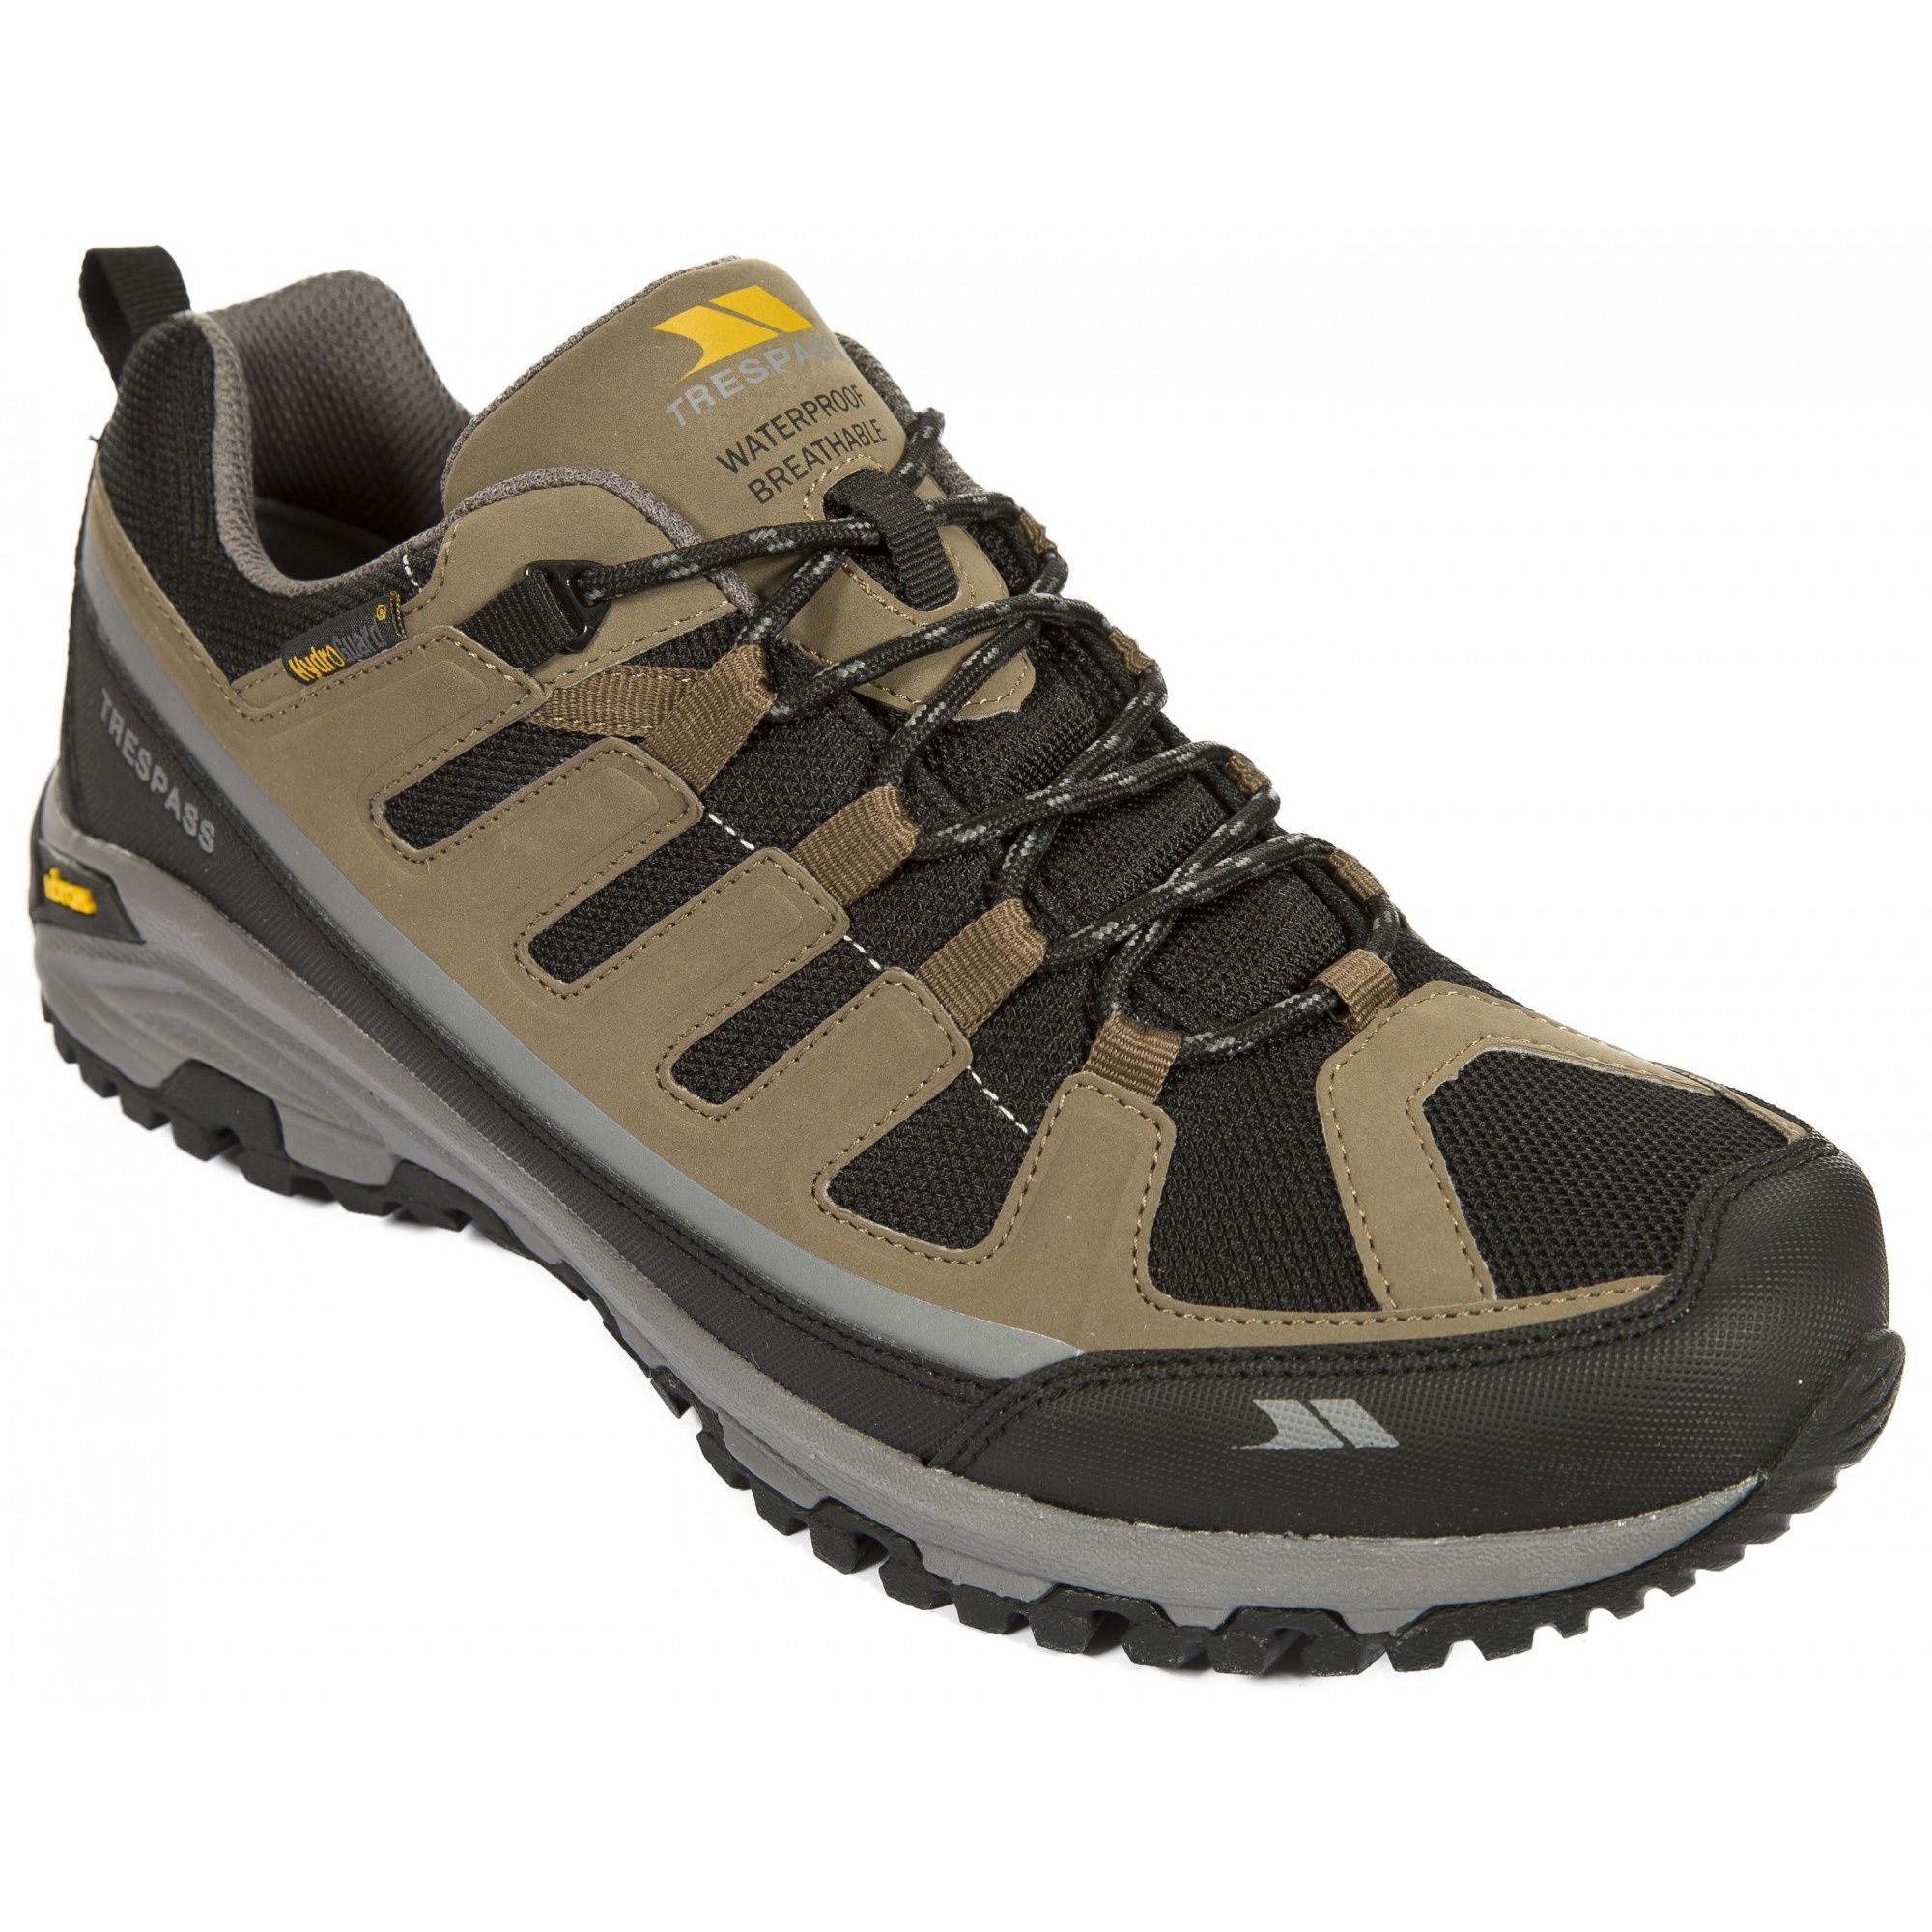 Mens low cut hiking trainers. Waterproof and breathable membrane. Gusseted tongue. Protective and durable all-round mudguard. Ankle supportive cushioned collar and tongue. Arch stabilising and supportive shank. Cushioned footbed. Upper: PU/textile, Lining: textile, Outsole: vibram-moulded EVA/phylon rubber.